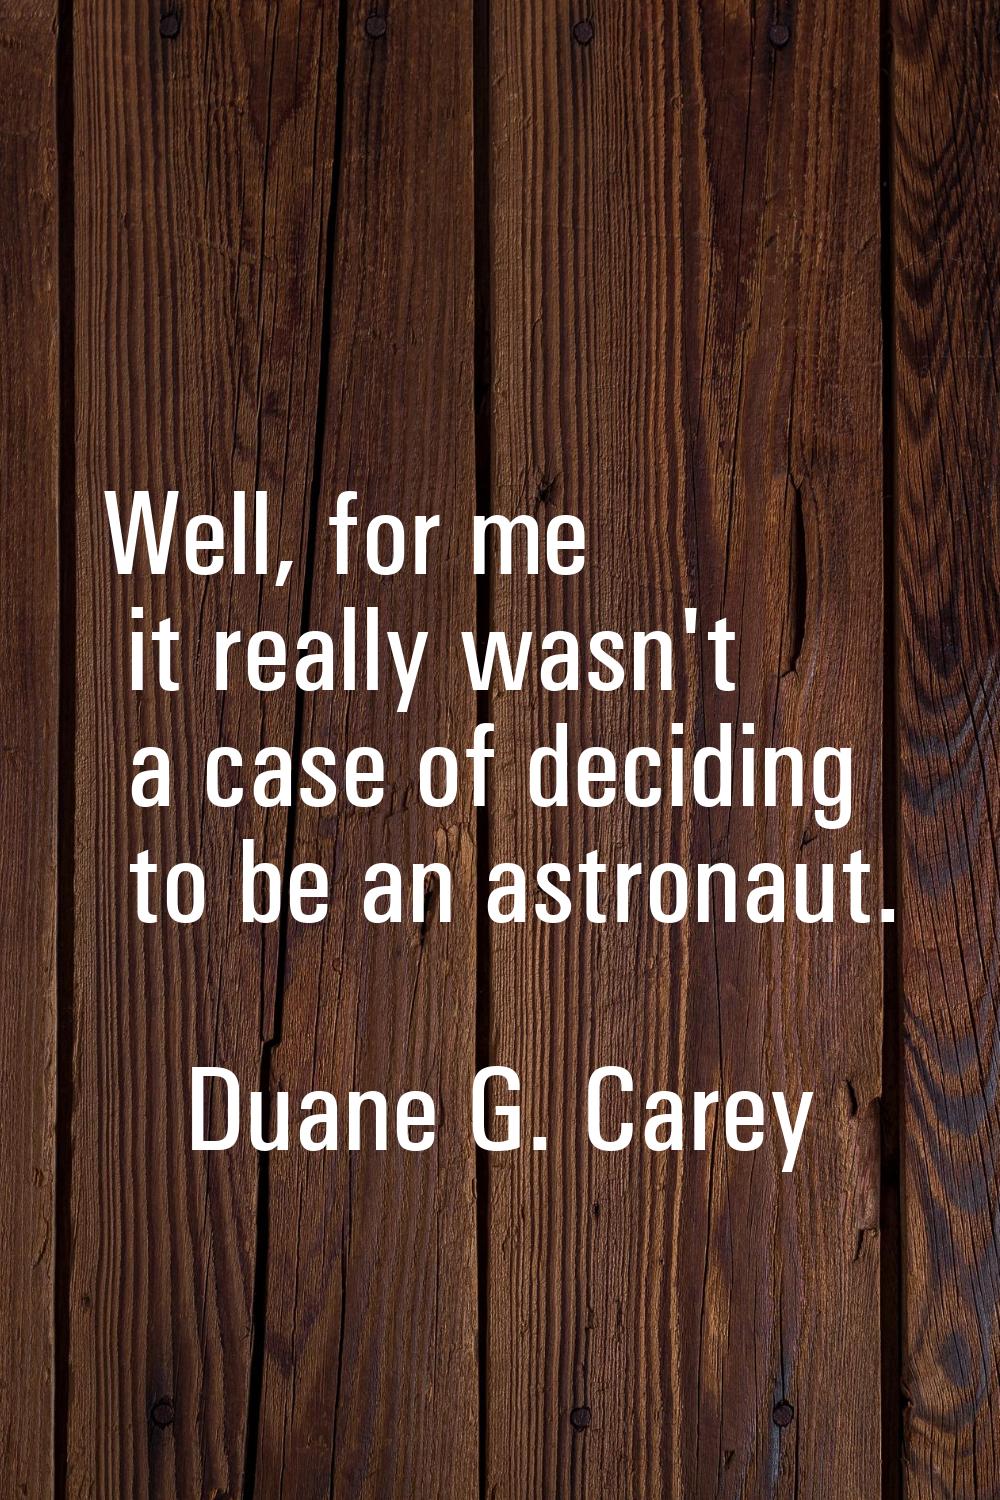 Well, for me it really wasn't a case of deciding to be an astronaut.